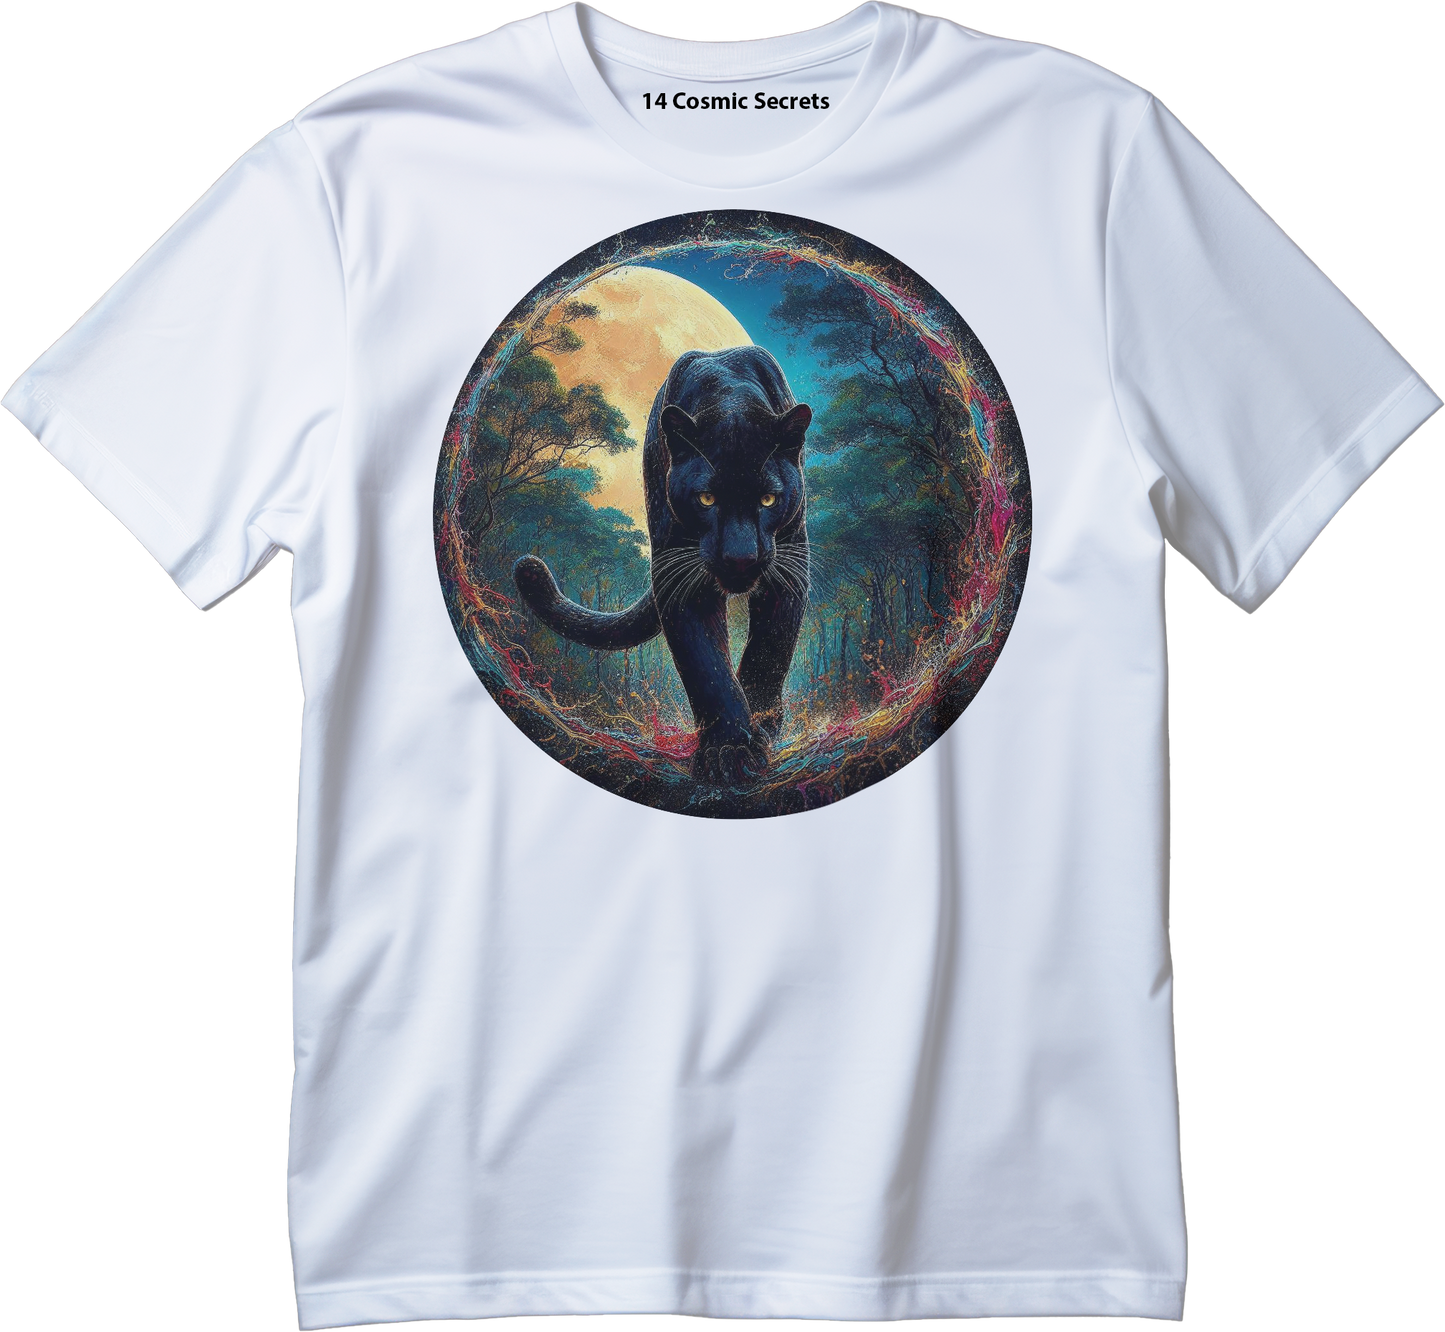 Born to Hunt Graphic Printed T-Shirt  Cotton T-Shirt Magnificence of India T-Shirt